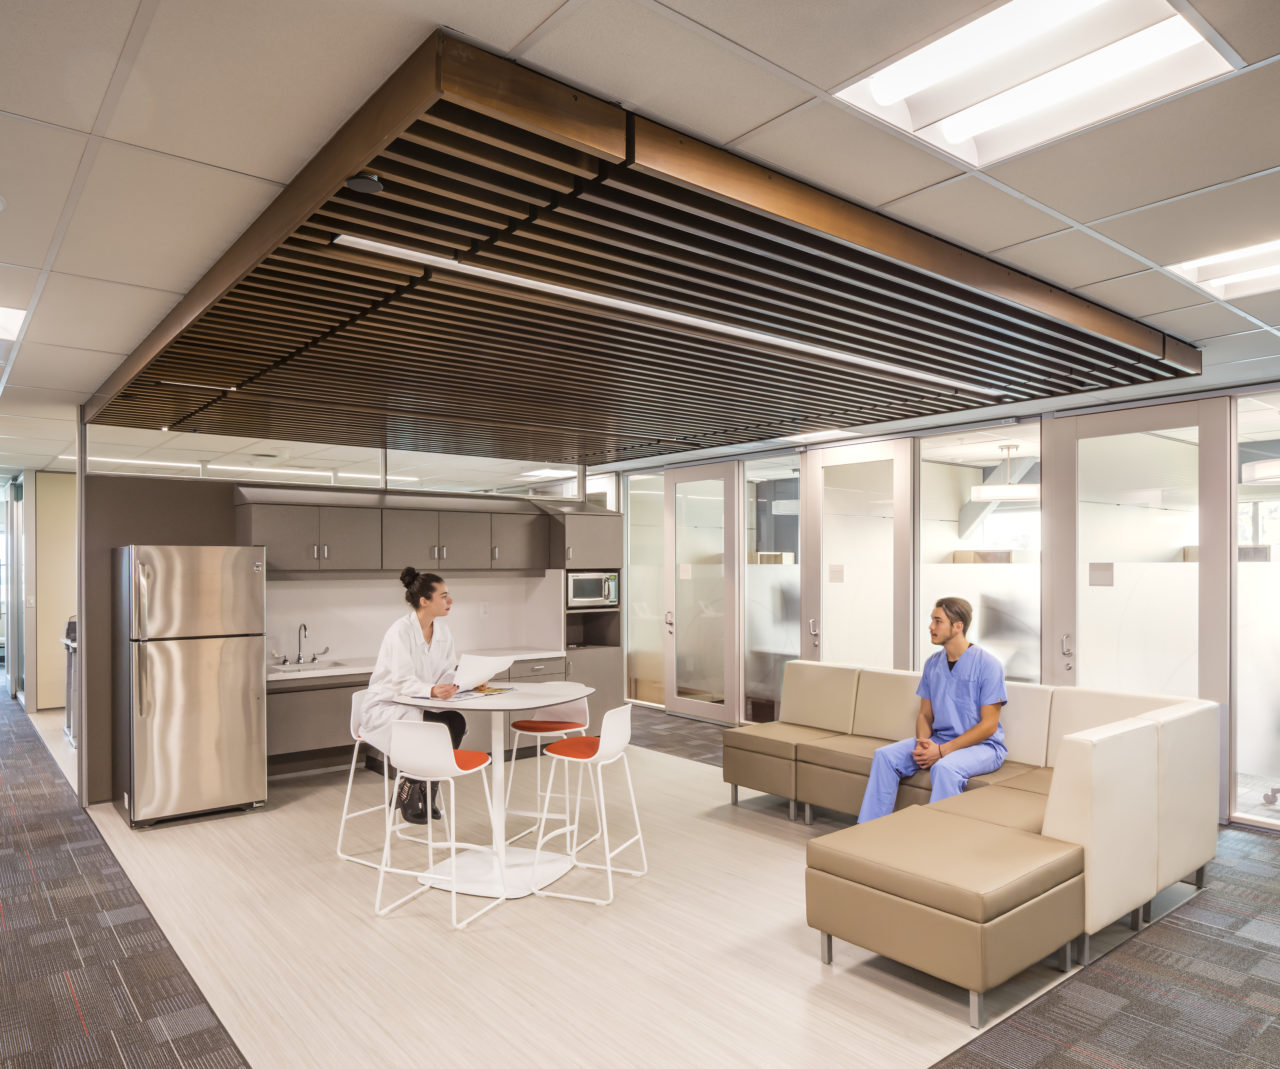 Hospital Room Design Strategies To Increase Staff Efficiency and ...